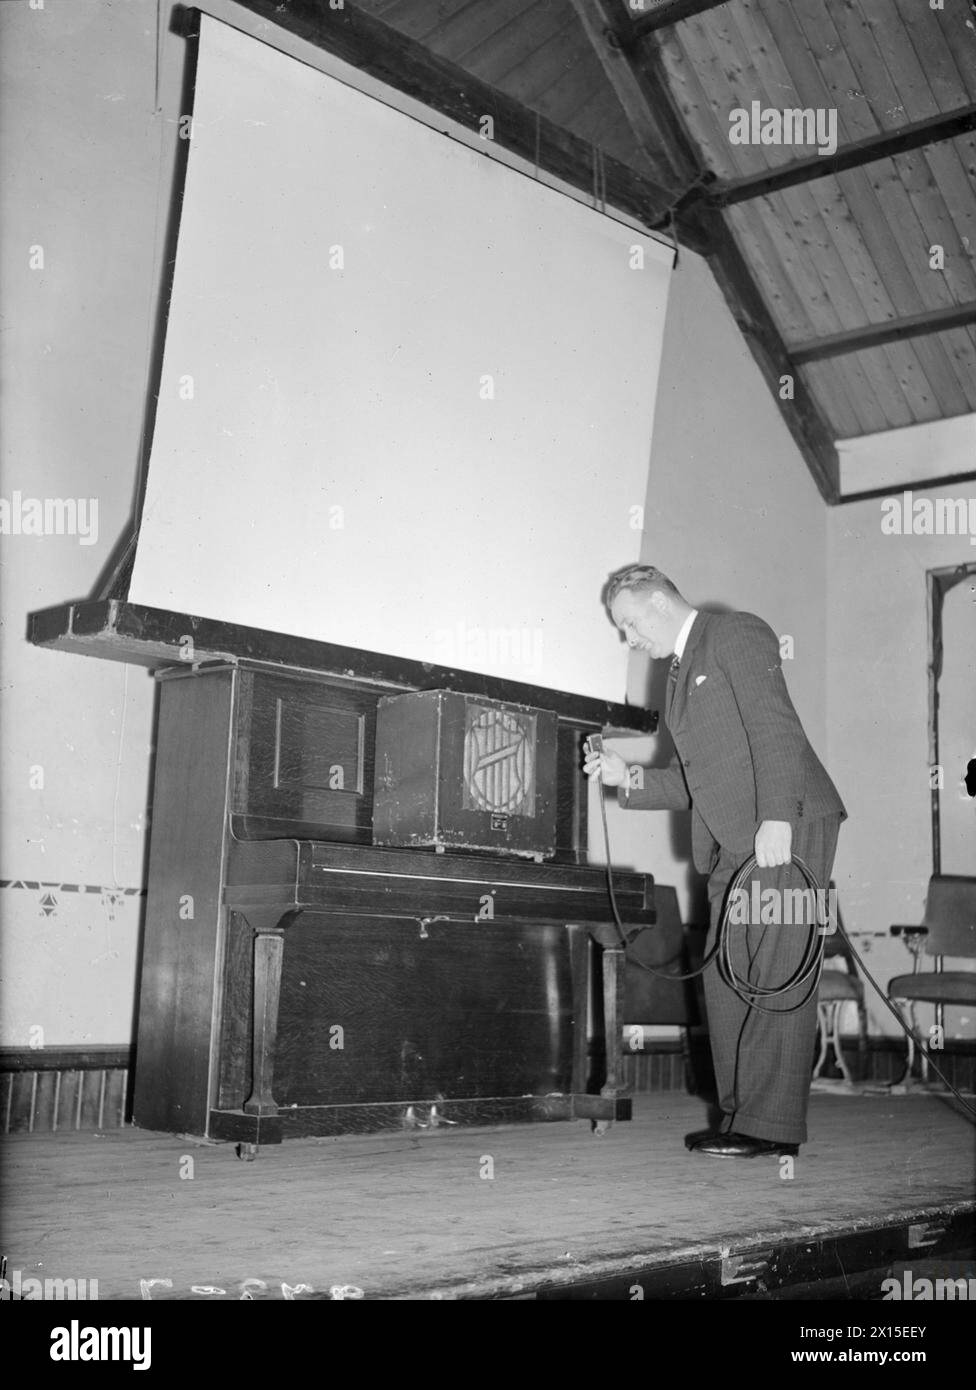 FILM SHOW AT HIGHEST VILLAGE IN THE HIGHLANDS: MINISTRY OF INFORMATION FILM SCREENING, TOMINTOUL, BANFFSHIRE, SCOTLAND, UK, 1943 - Ministry of Information Film Operator John Macdougall sets up a screen and loudspeaker in the Memorial Hall in Tomintoul in preparation for the screening of a Ministry of Information film. The loud speaker is resting on the closed lid of an upright piano, with the screen resting on the top of the piano. Mr Macdougall is connecting the 'soundbox'. The original caption states that 'power is provided by the generator in [his] van outside' Stock Photo